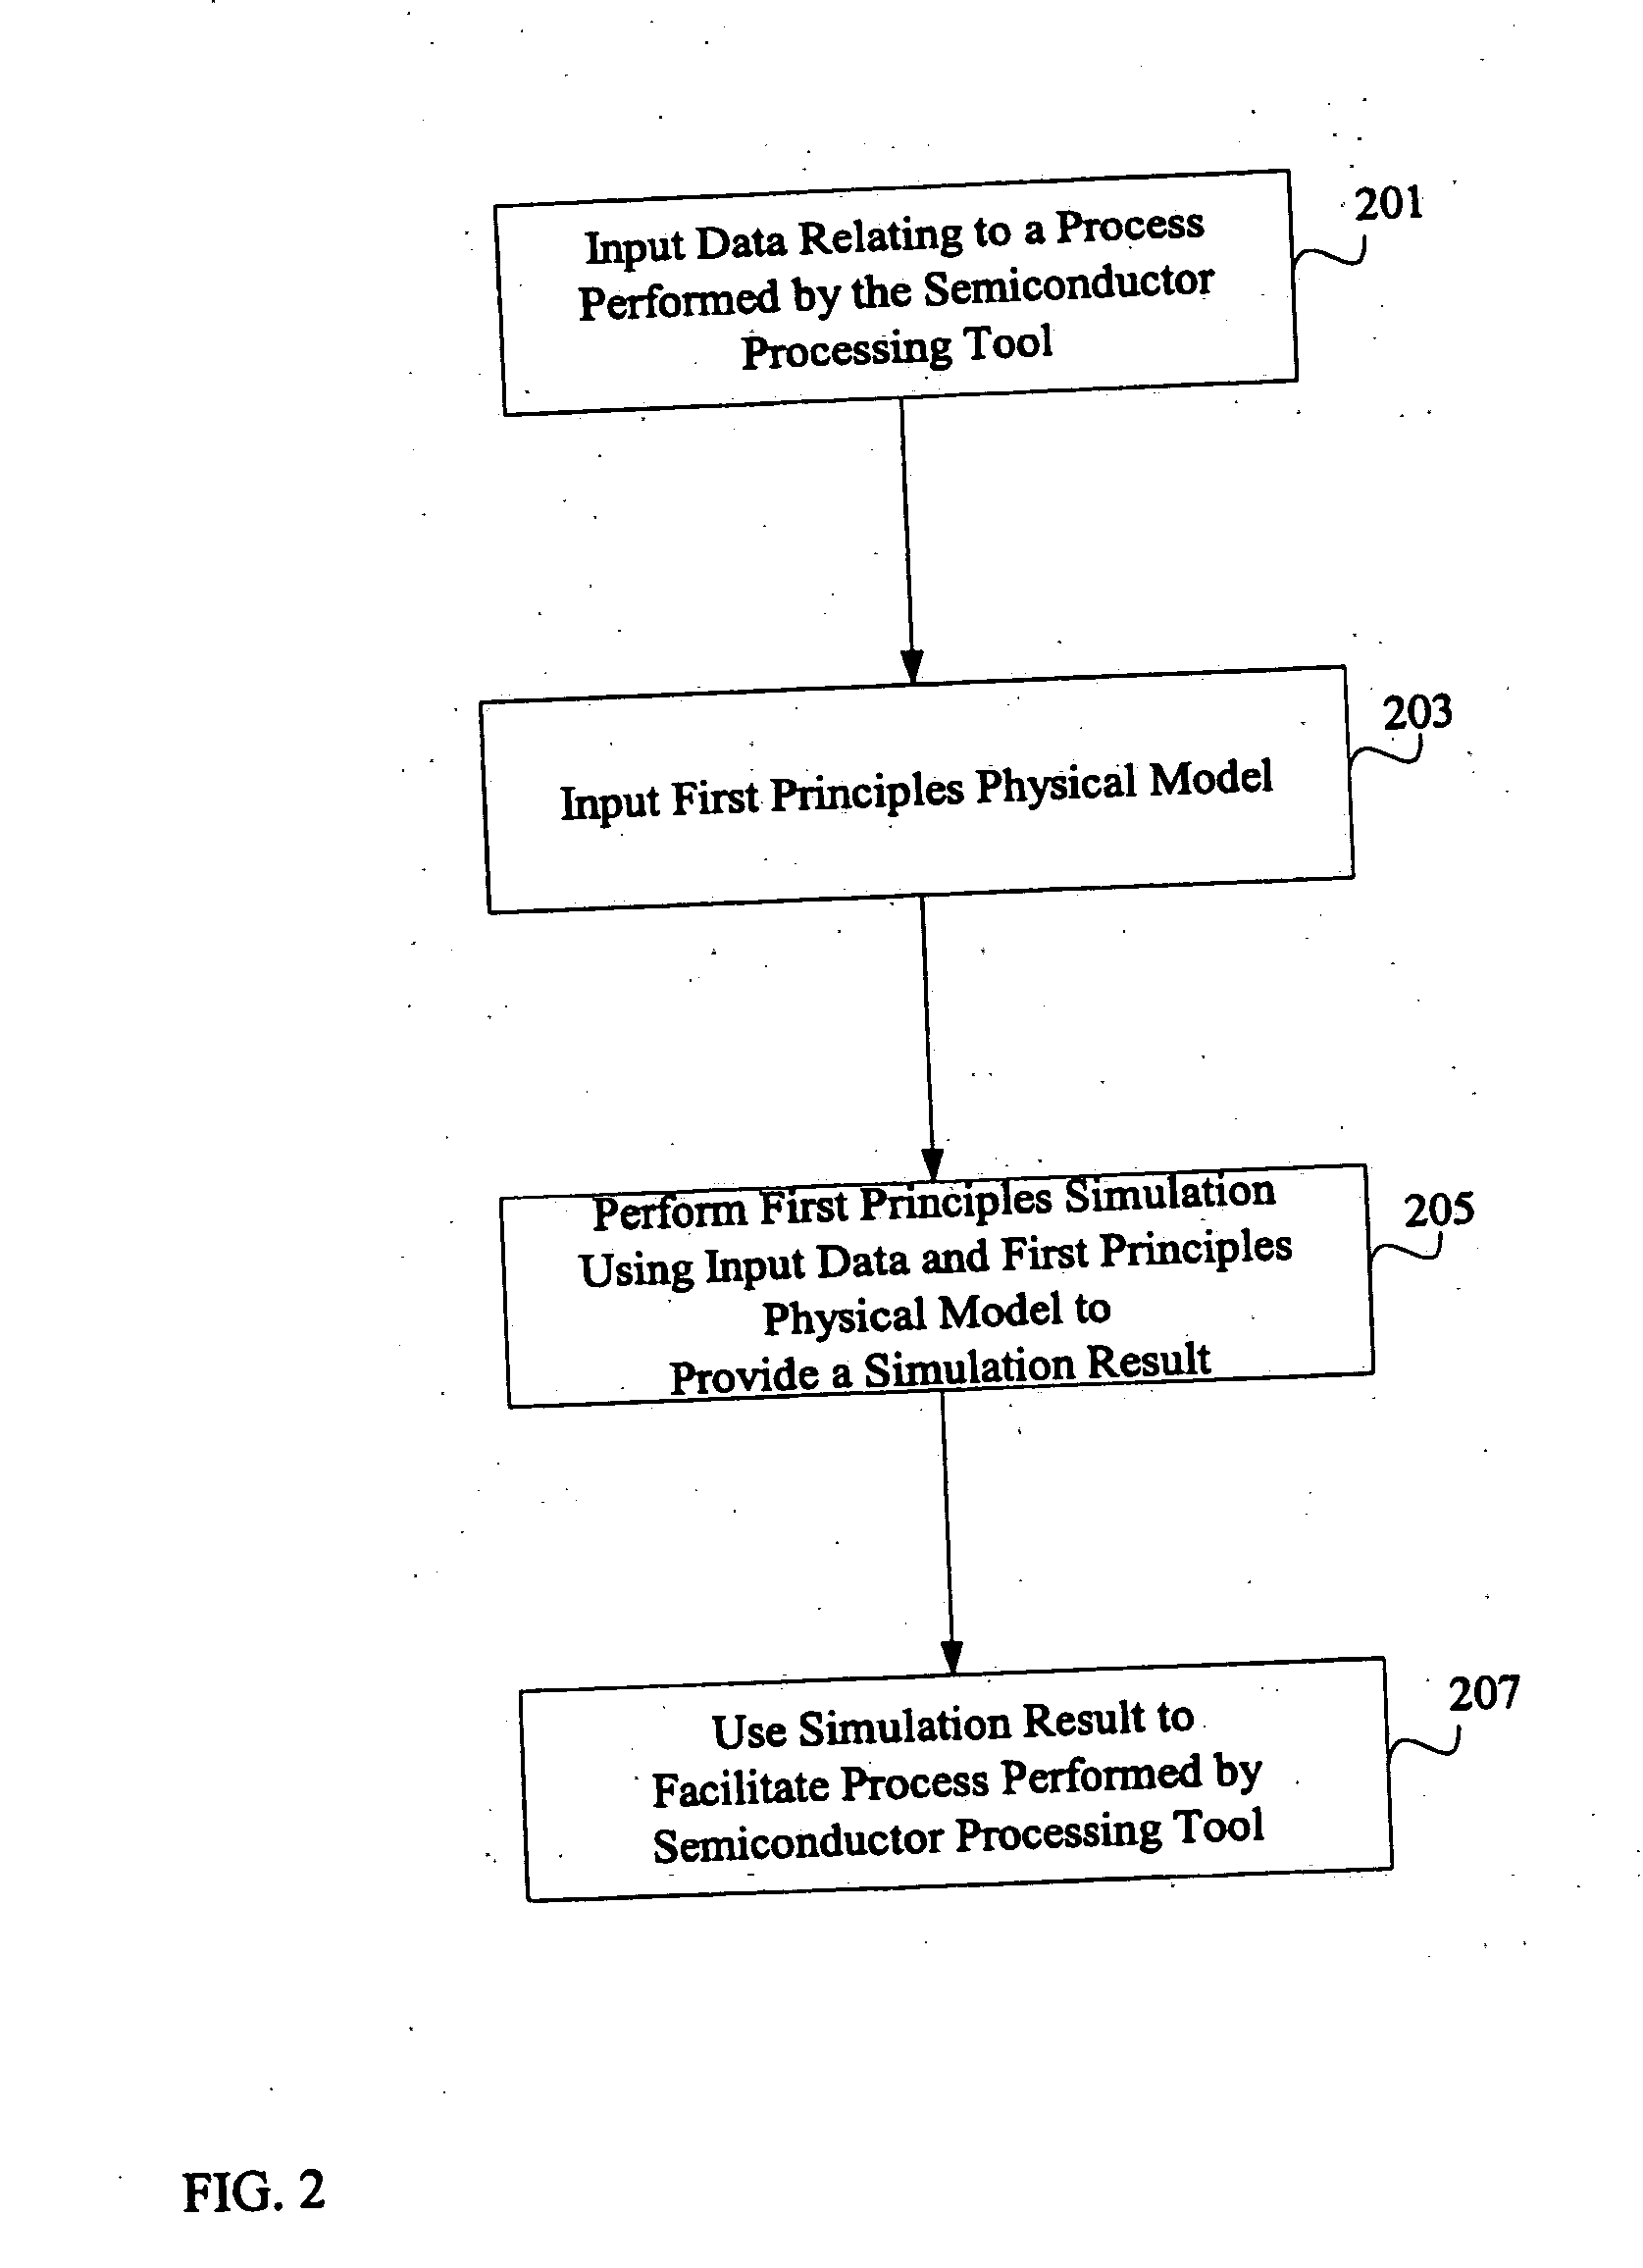 System and method for using first-principles simulation to control a semiconductor manufacturing process